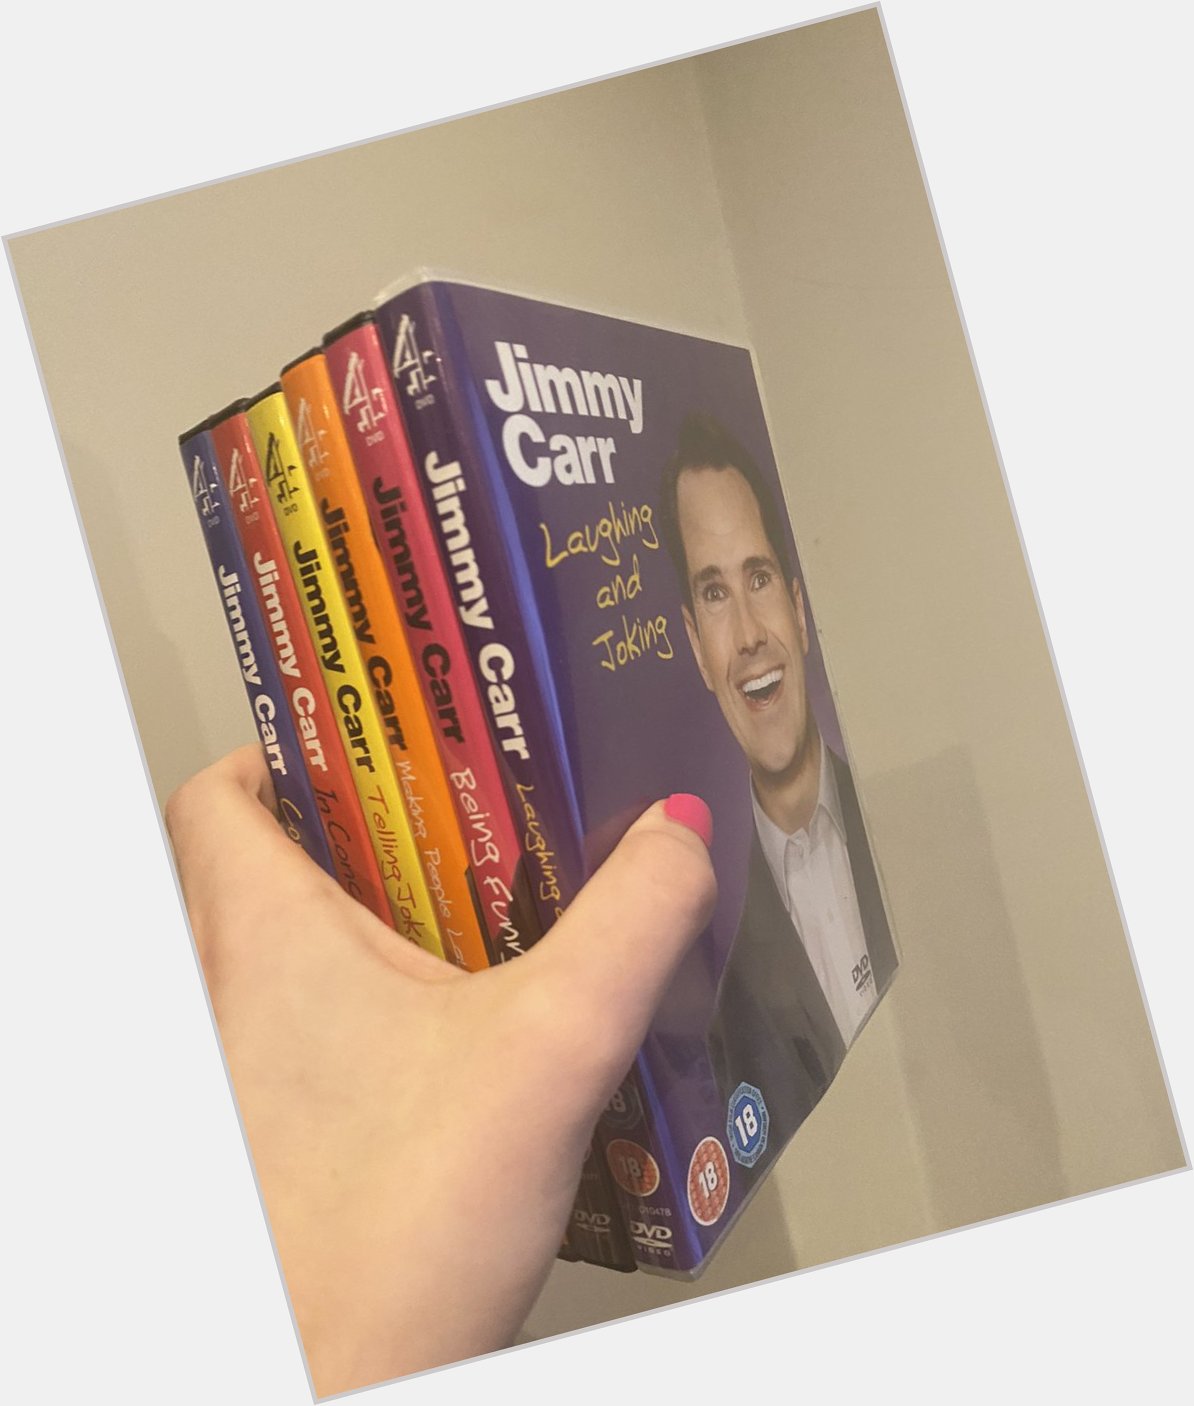 Happy Birthday Jimmy Carr, your comedy dvd s are some of my priced possessions 